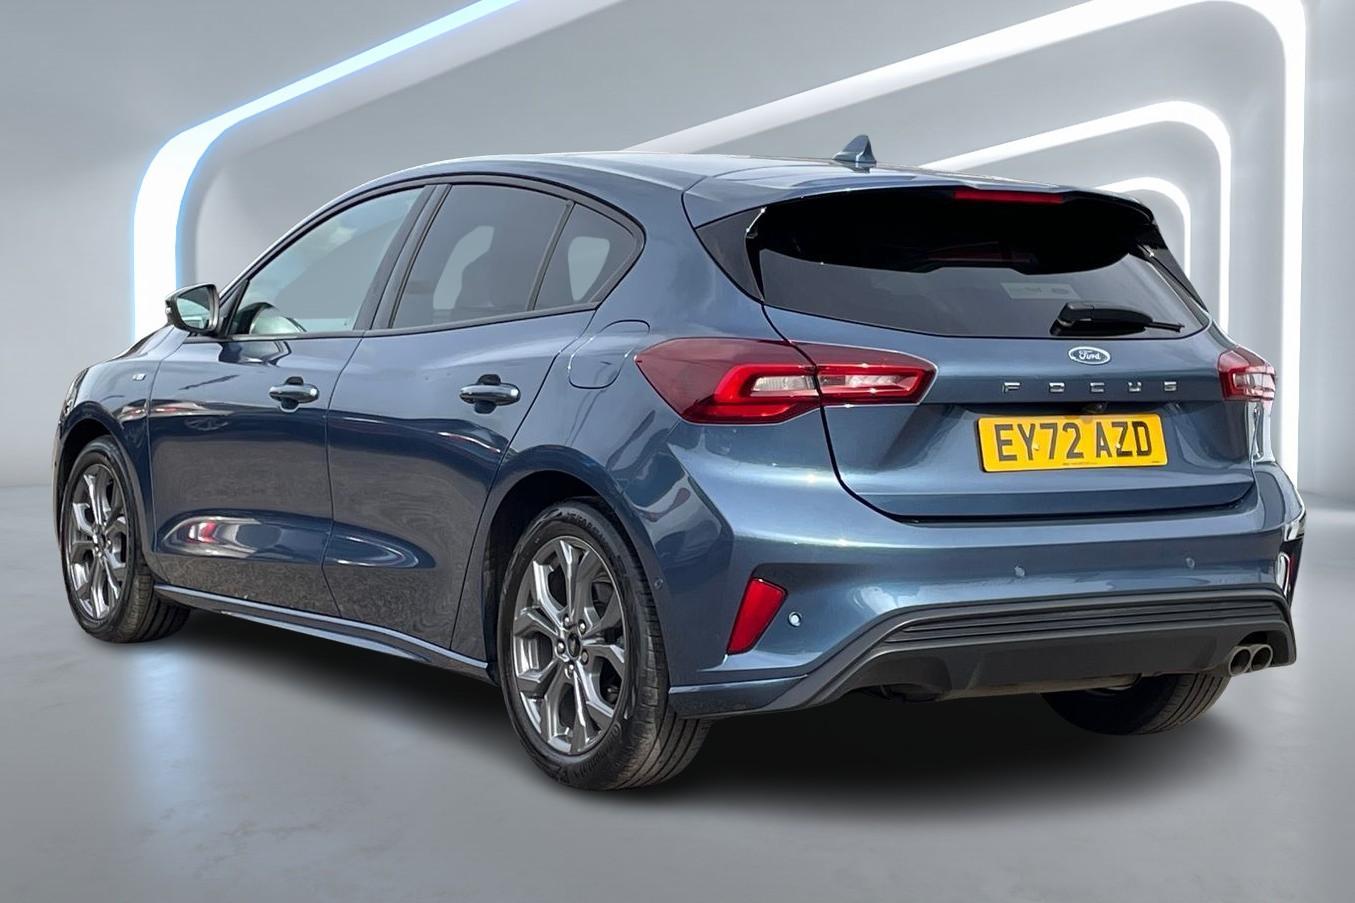 Ford Focus 1.0 EcoBoost ST-Line Style 5dr